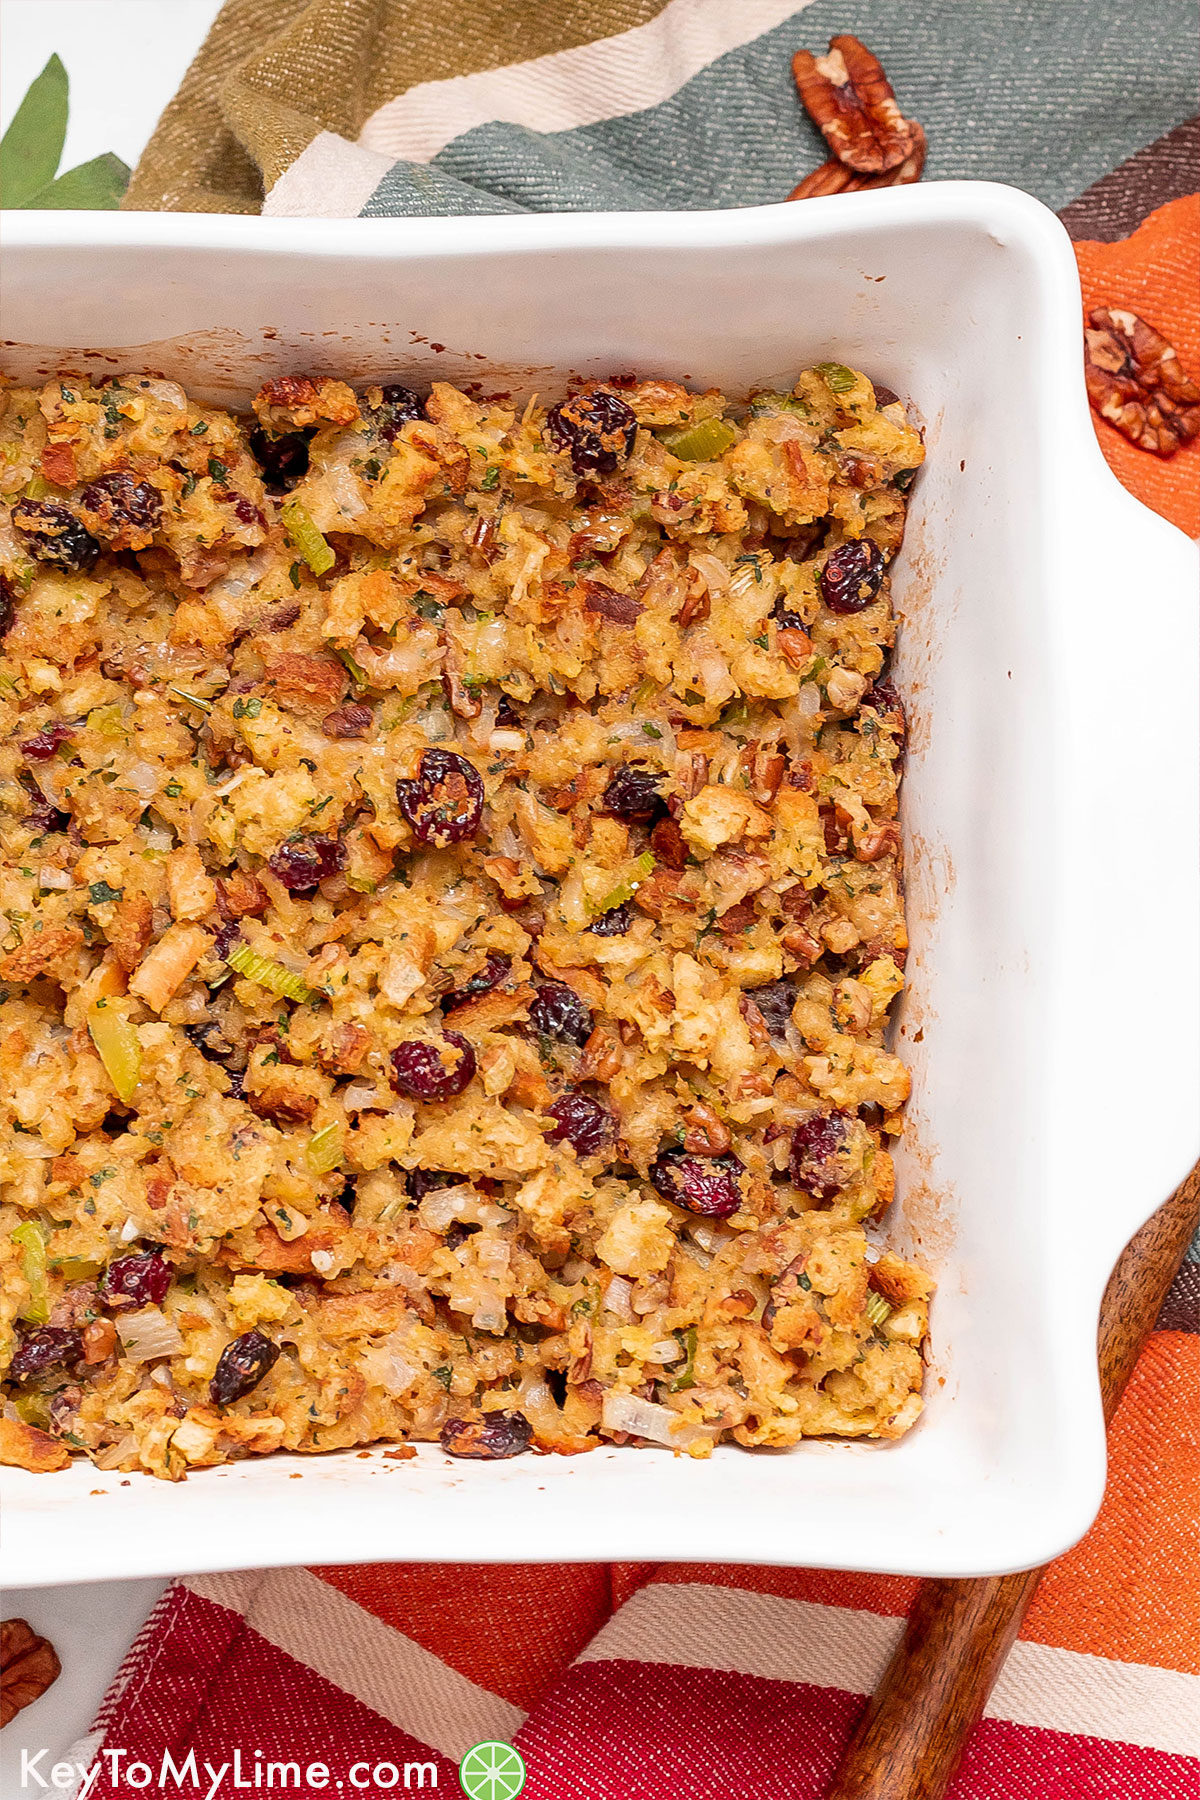 A casserole dish filled with freshly baked stuffing with cranberries and celery throughout.